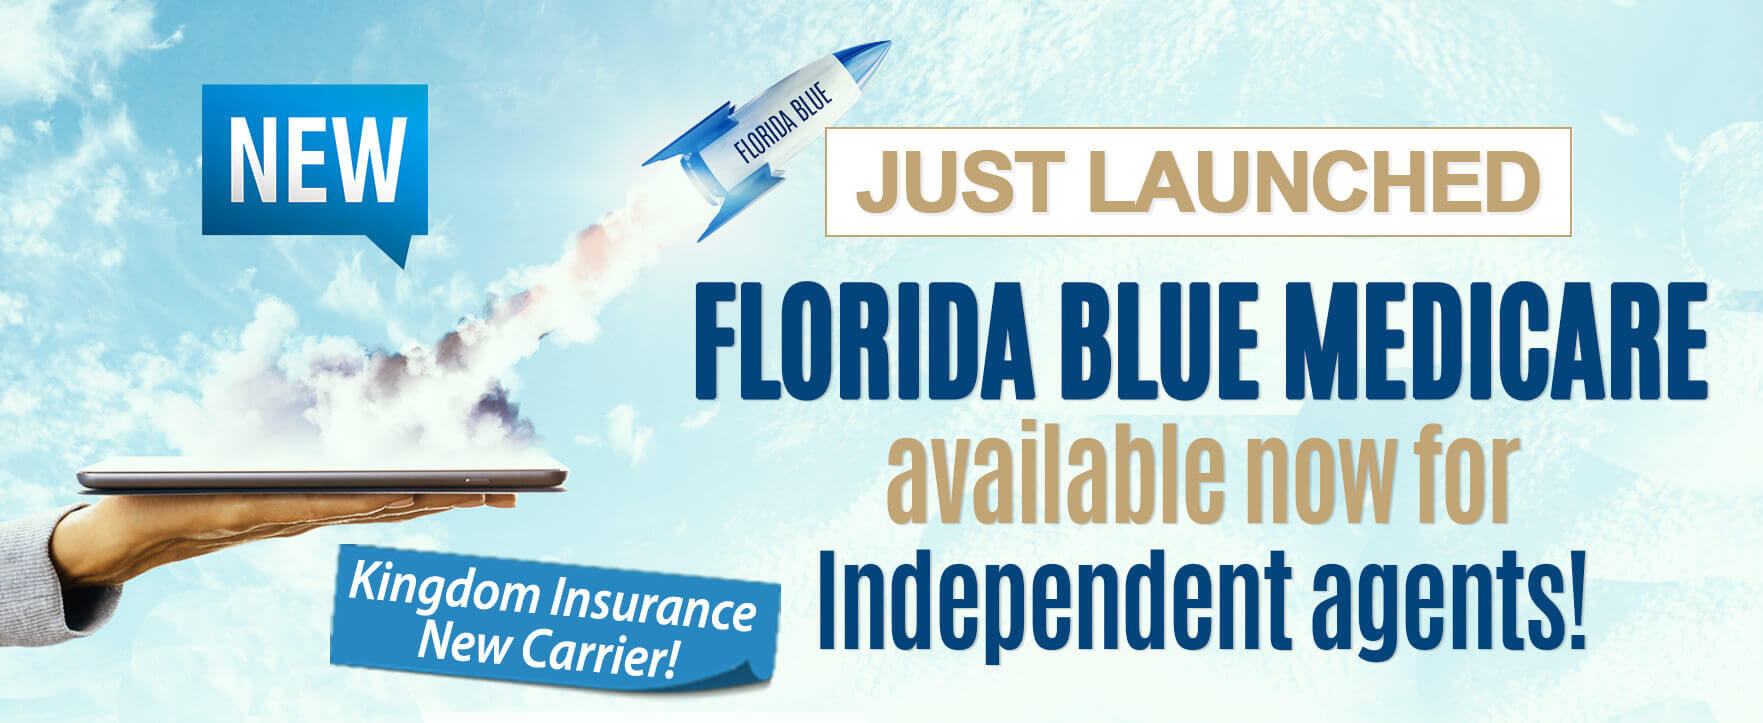 Just Launched: Florida Blue Medicare available now for independent agents!